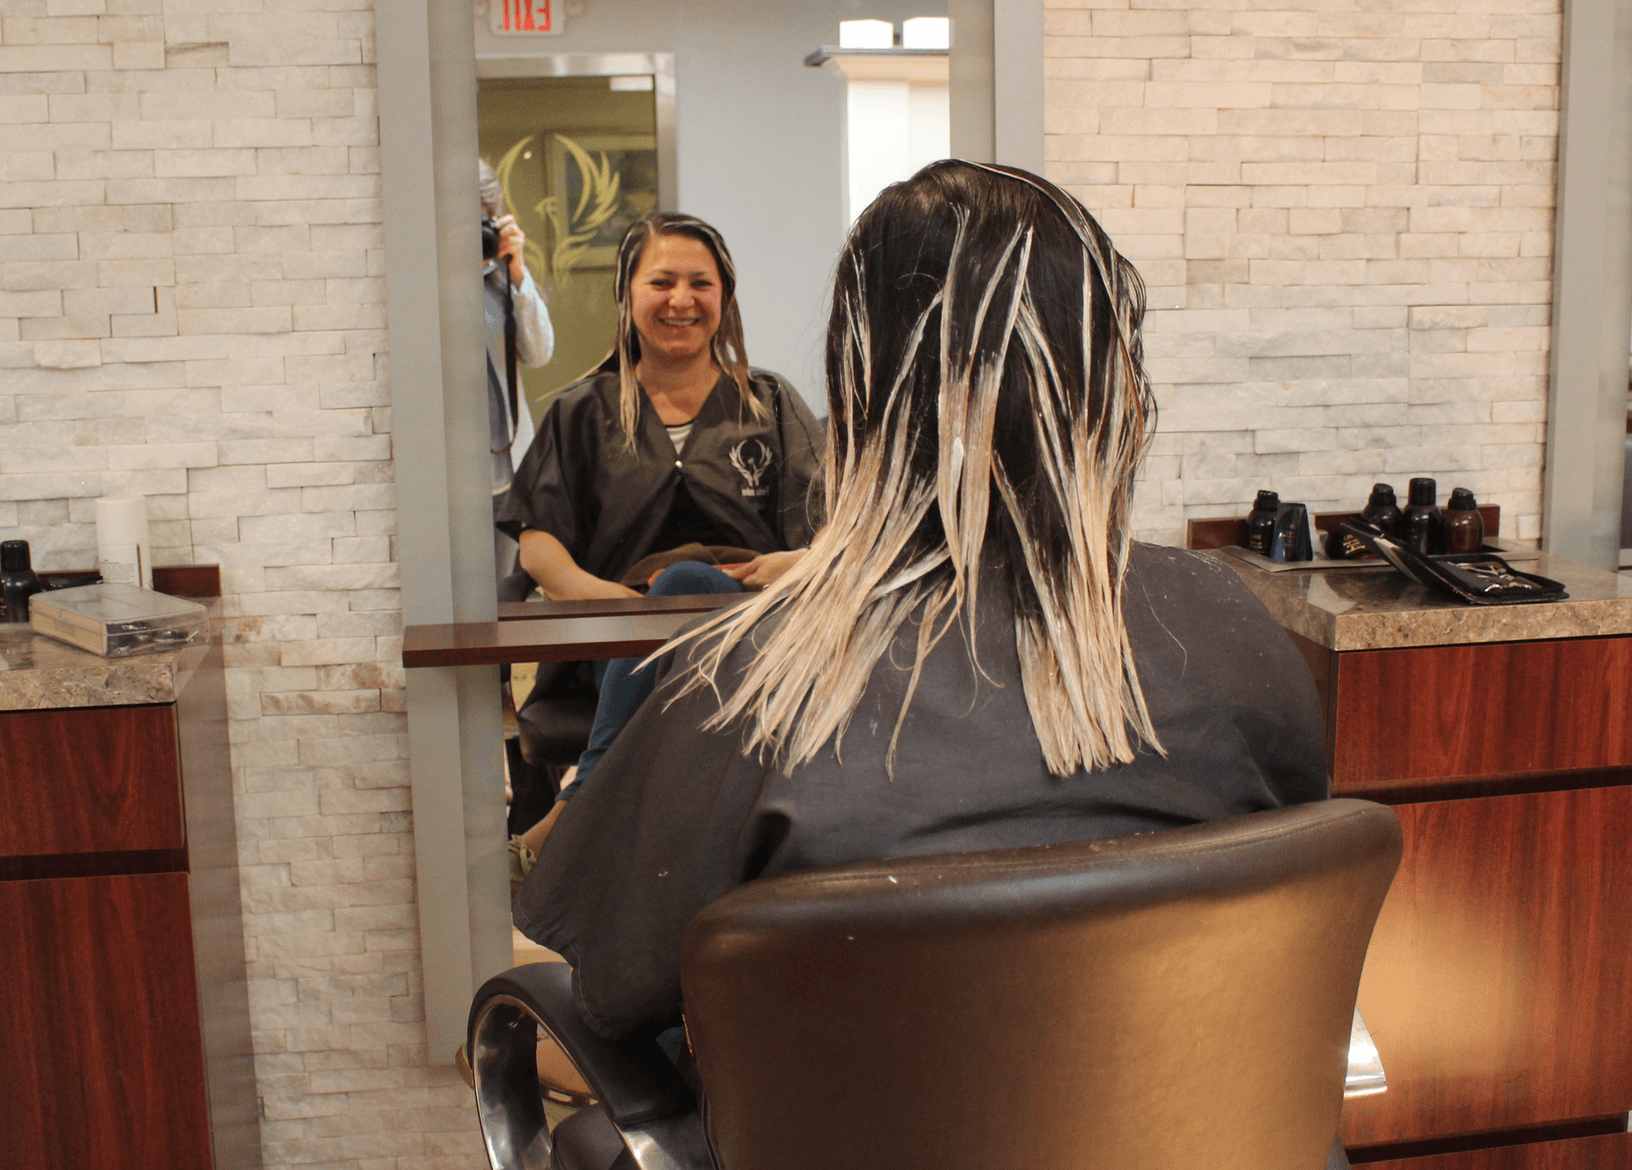 Mid-point in the ombré process at Fenix Salon. May 12, 2017 Photo: Leslie Yager